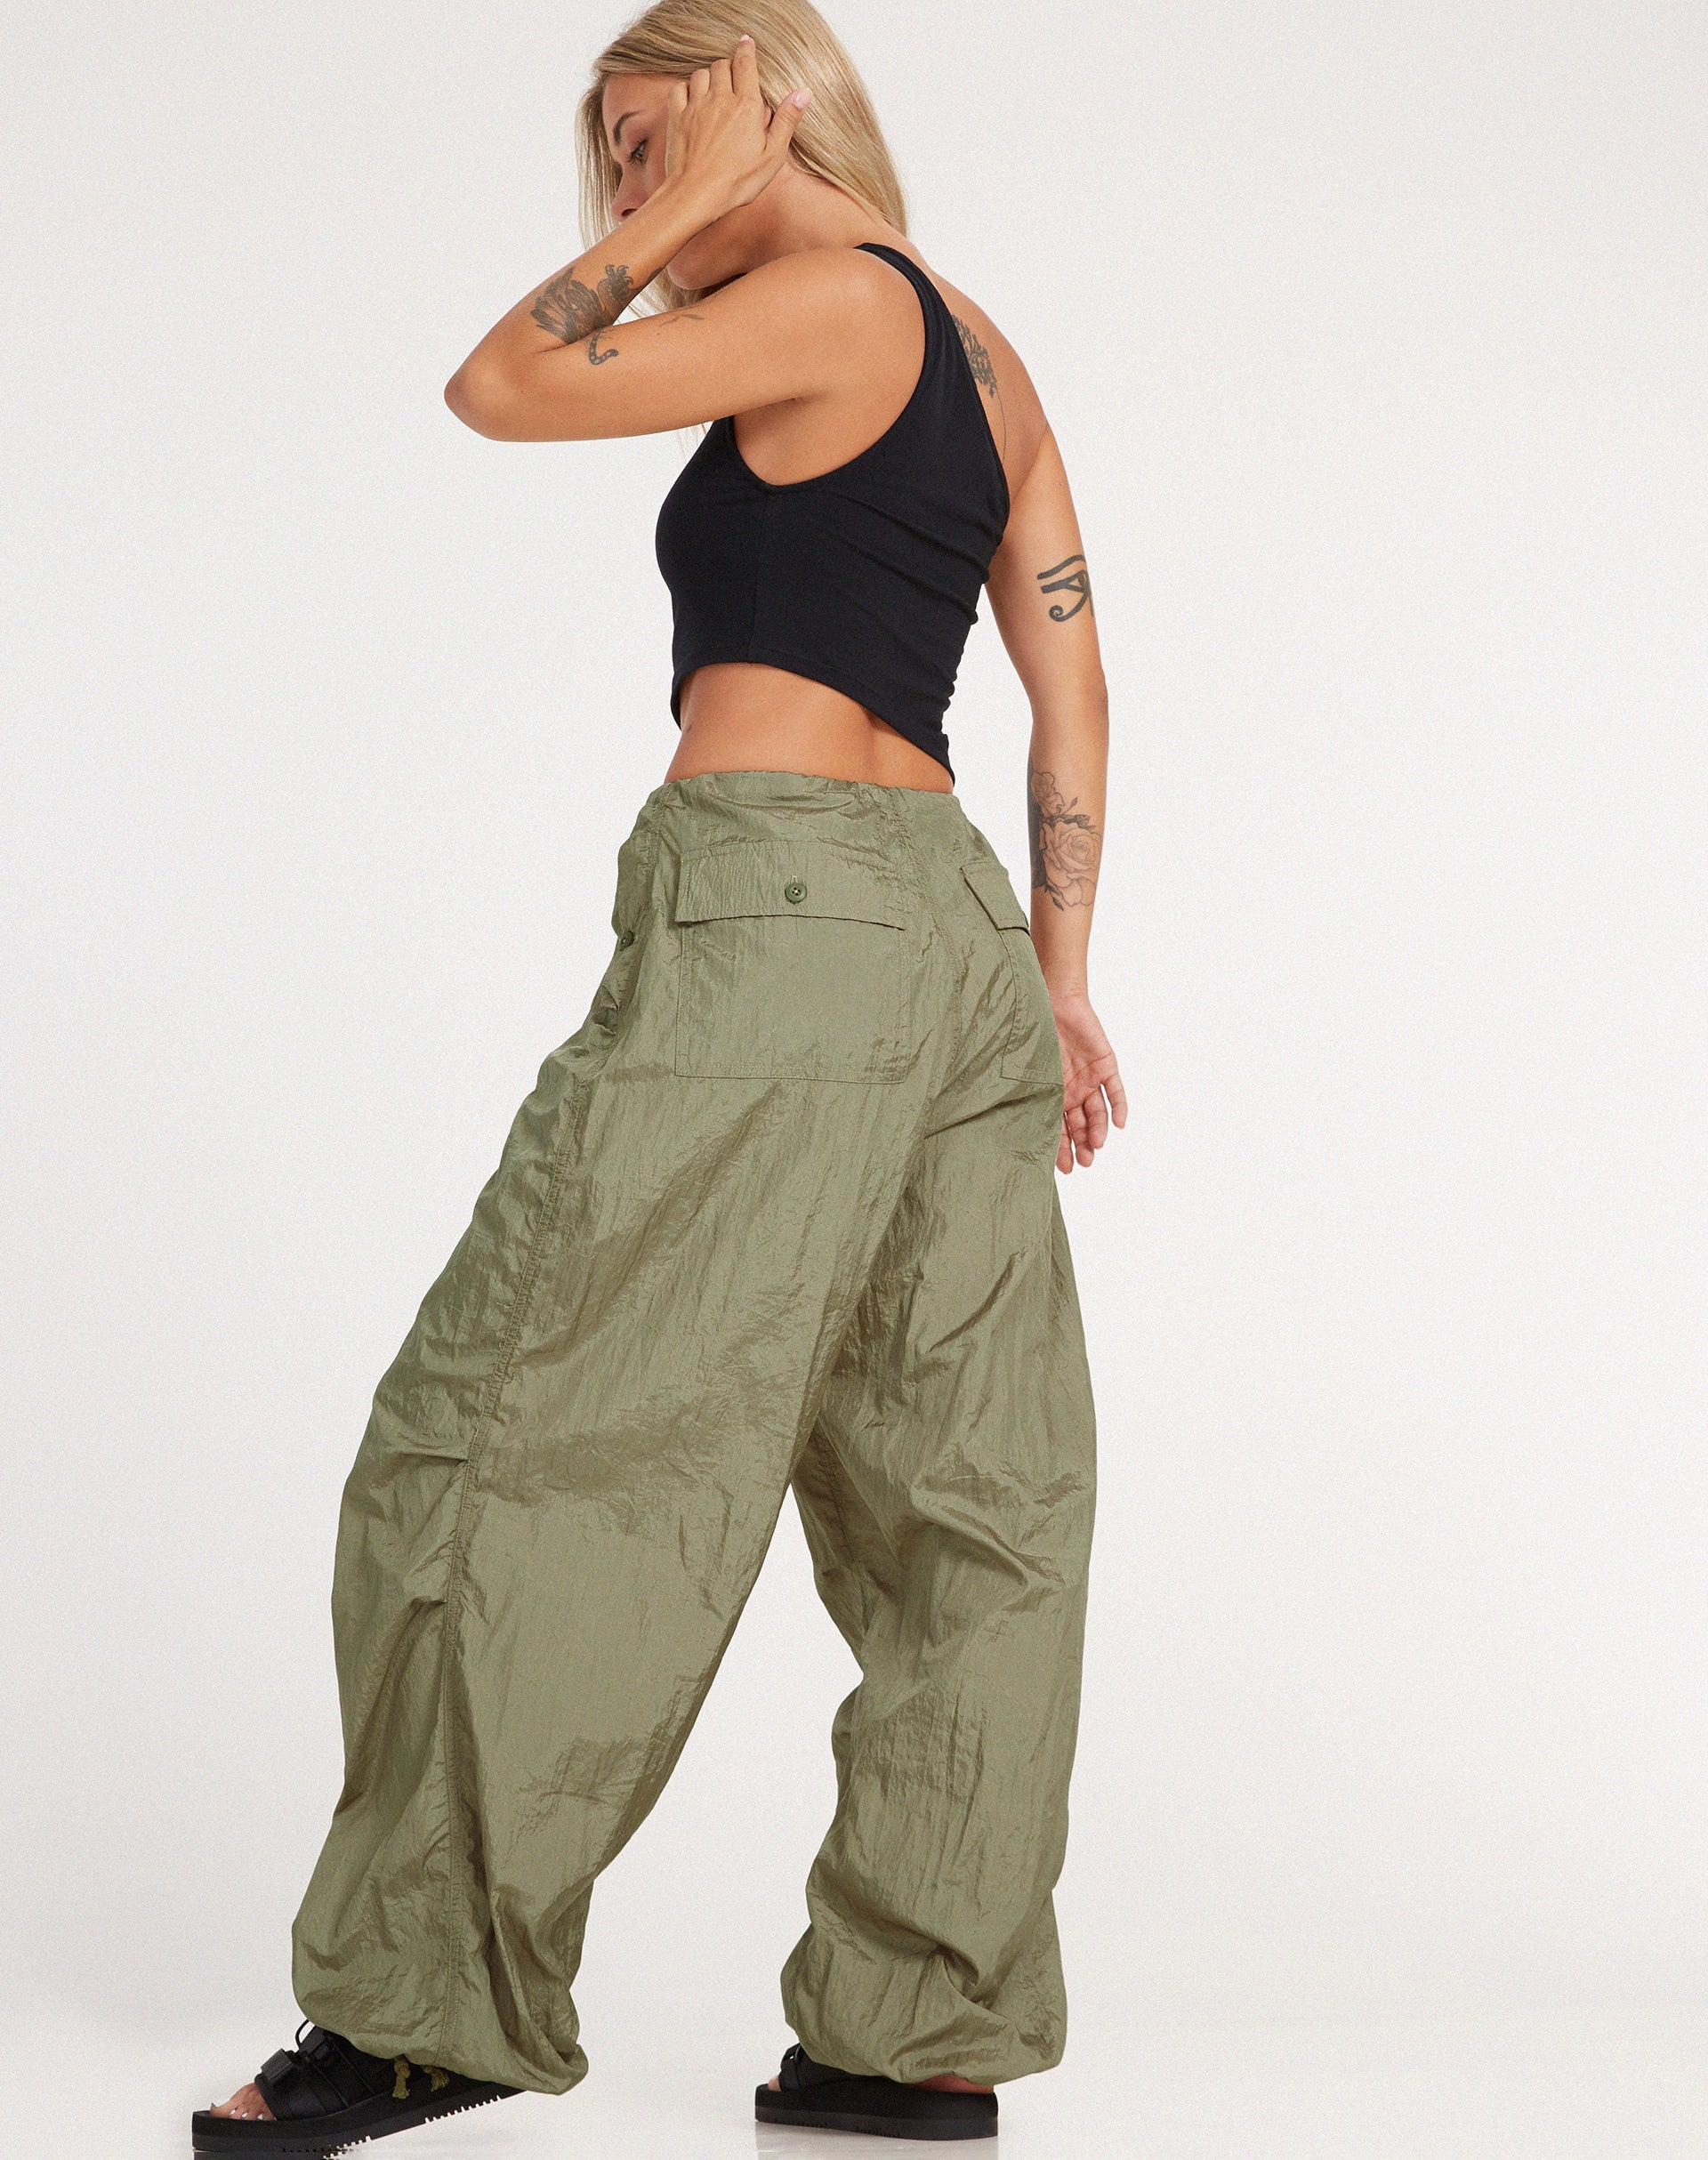 image of Chute Trouser in Parachute Silver Green